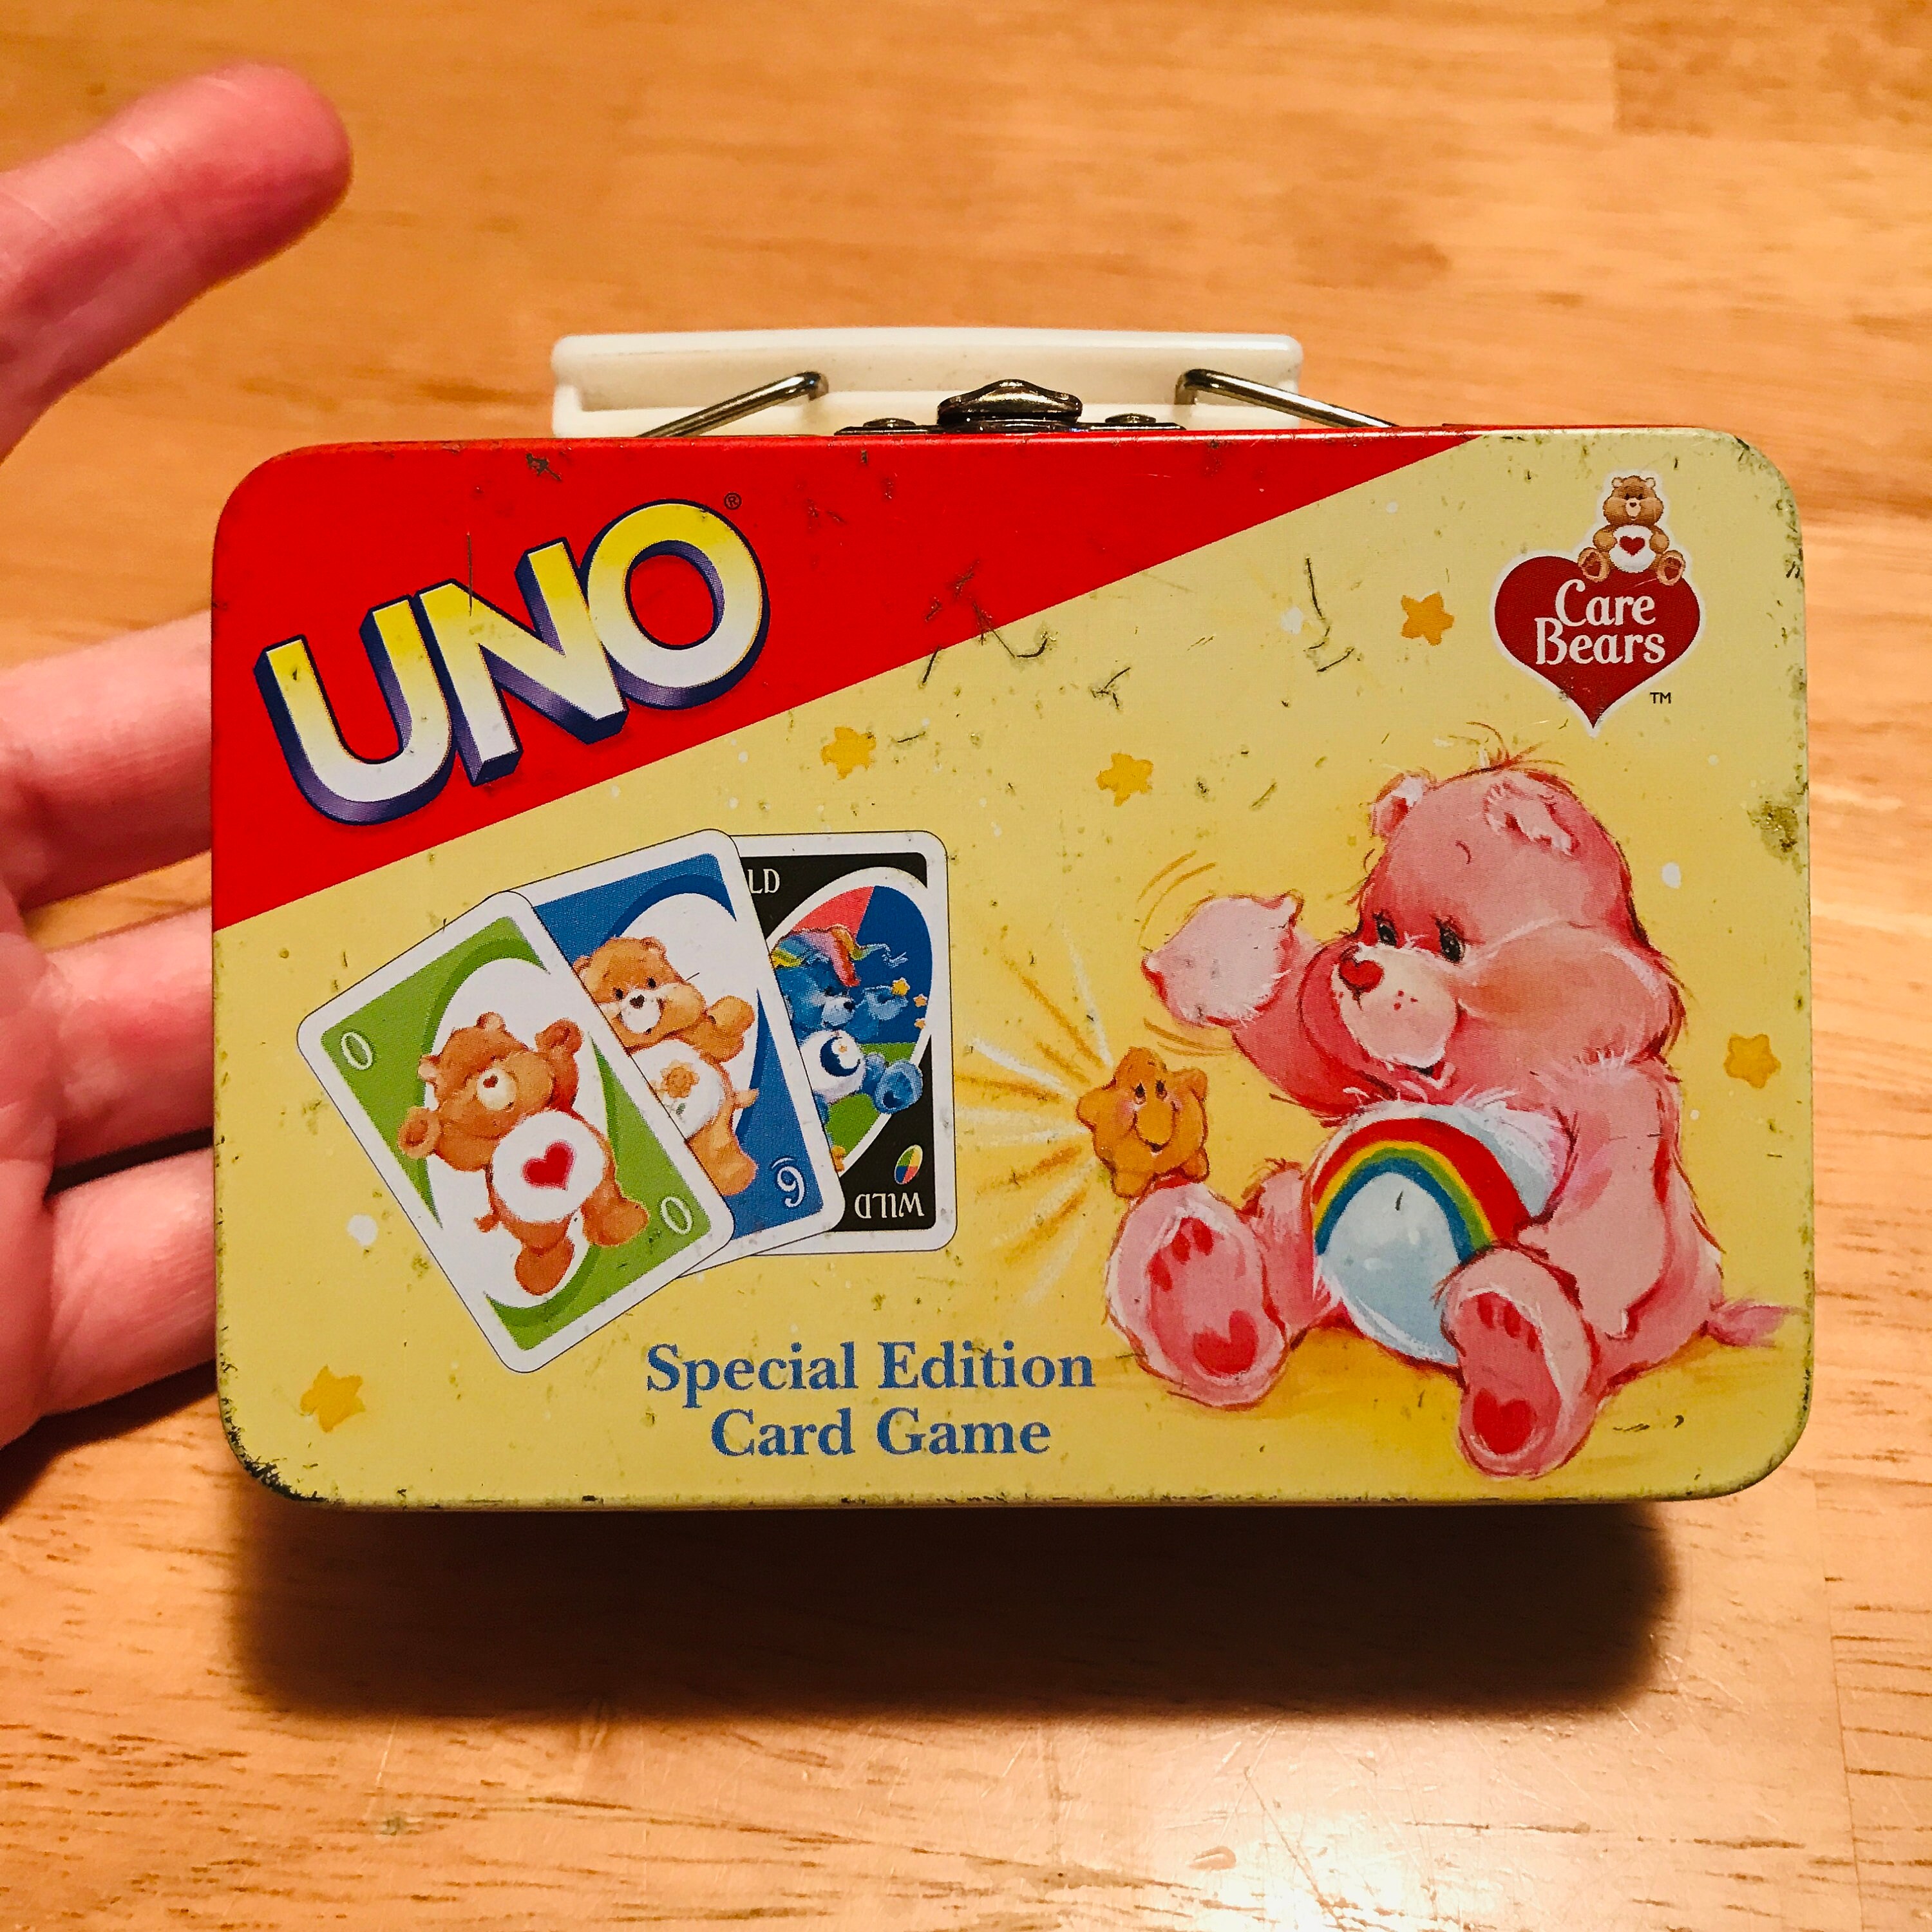 Buy Uno Deluxe in Tin Online at Lowest Price Ever in India